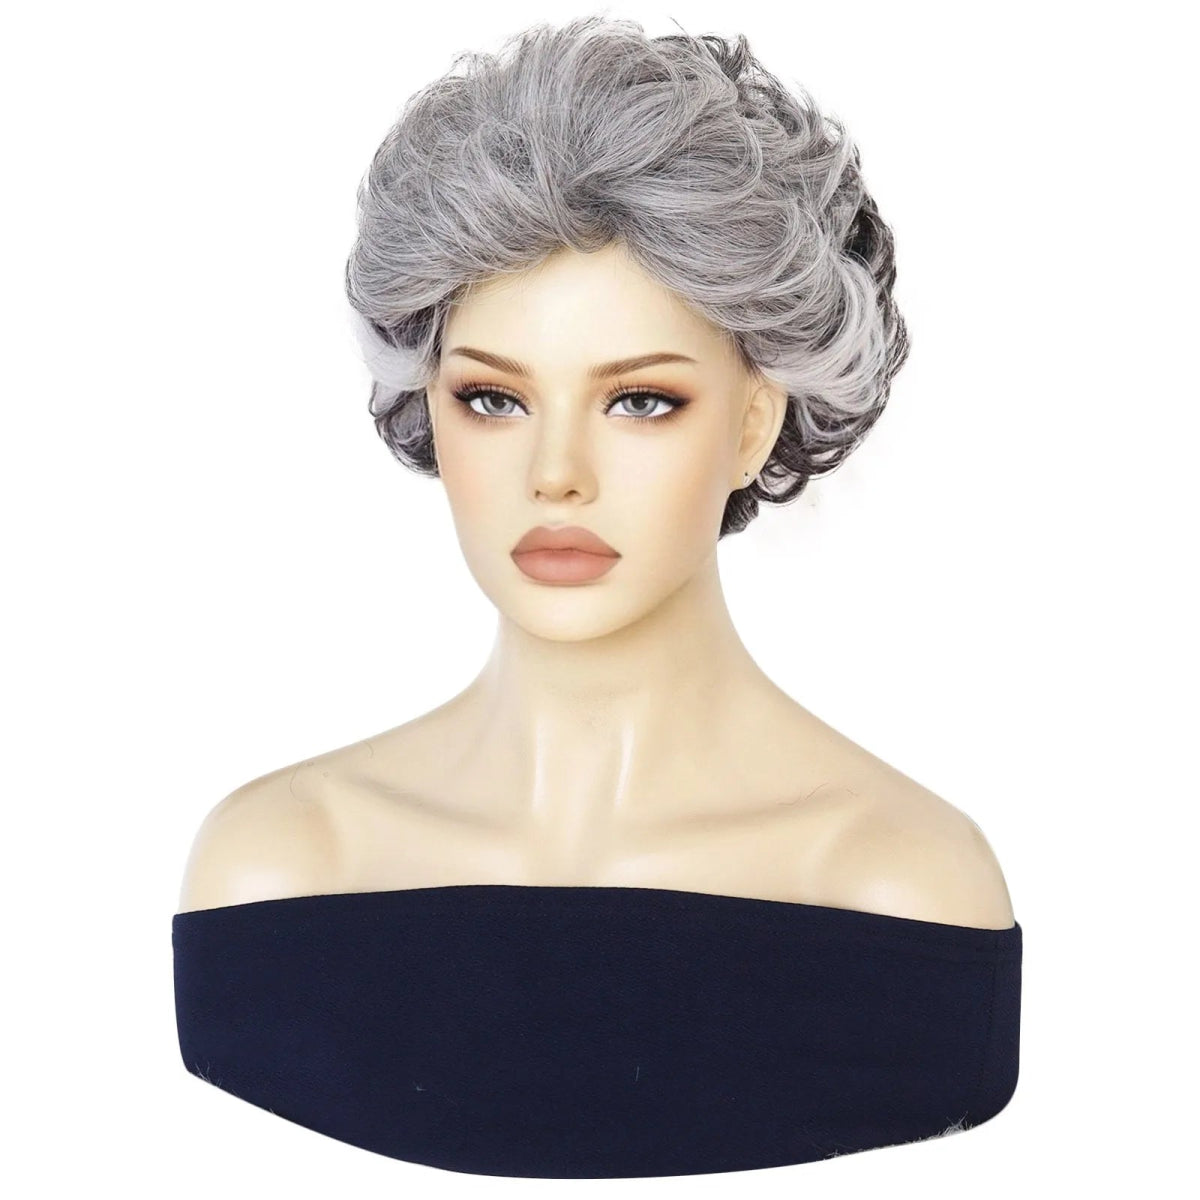 Grey Vintage Old Lady Short Synthetic Wig - HairNjoy